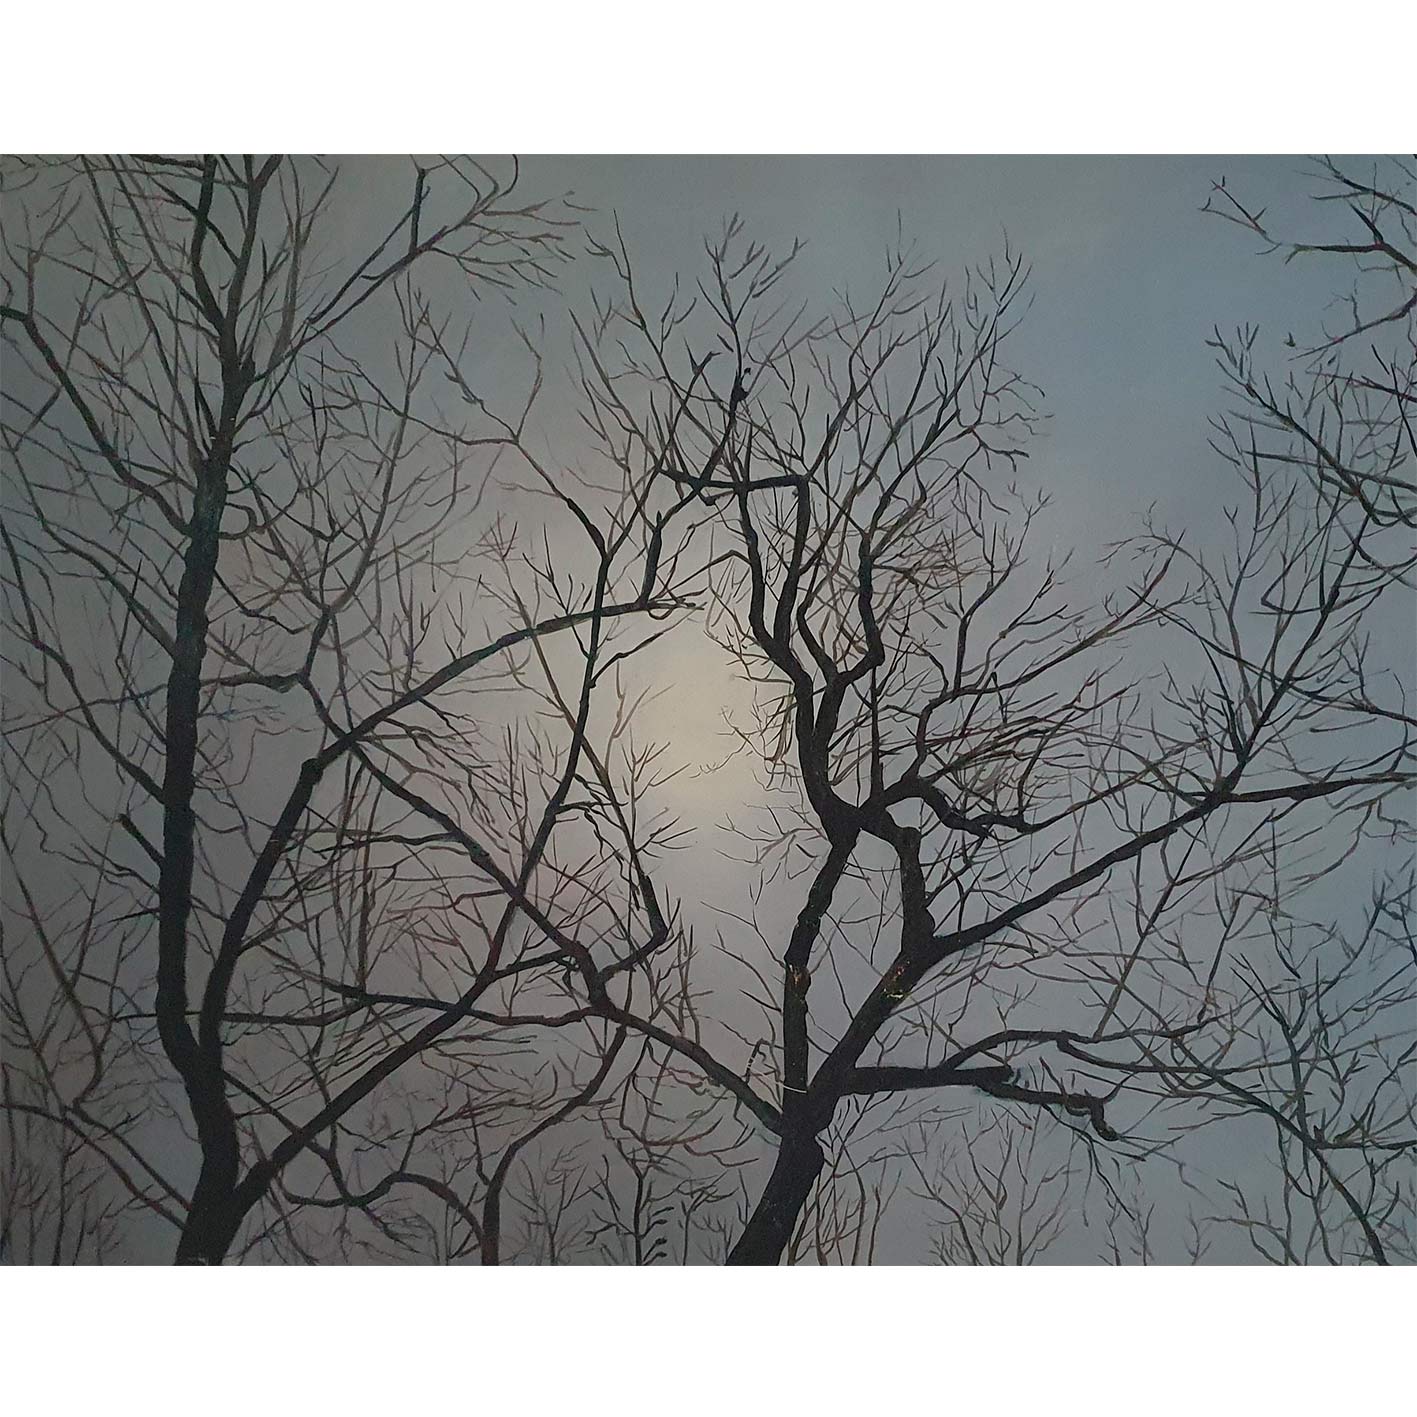 Gray Branches Painting 